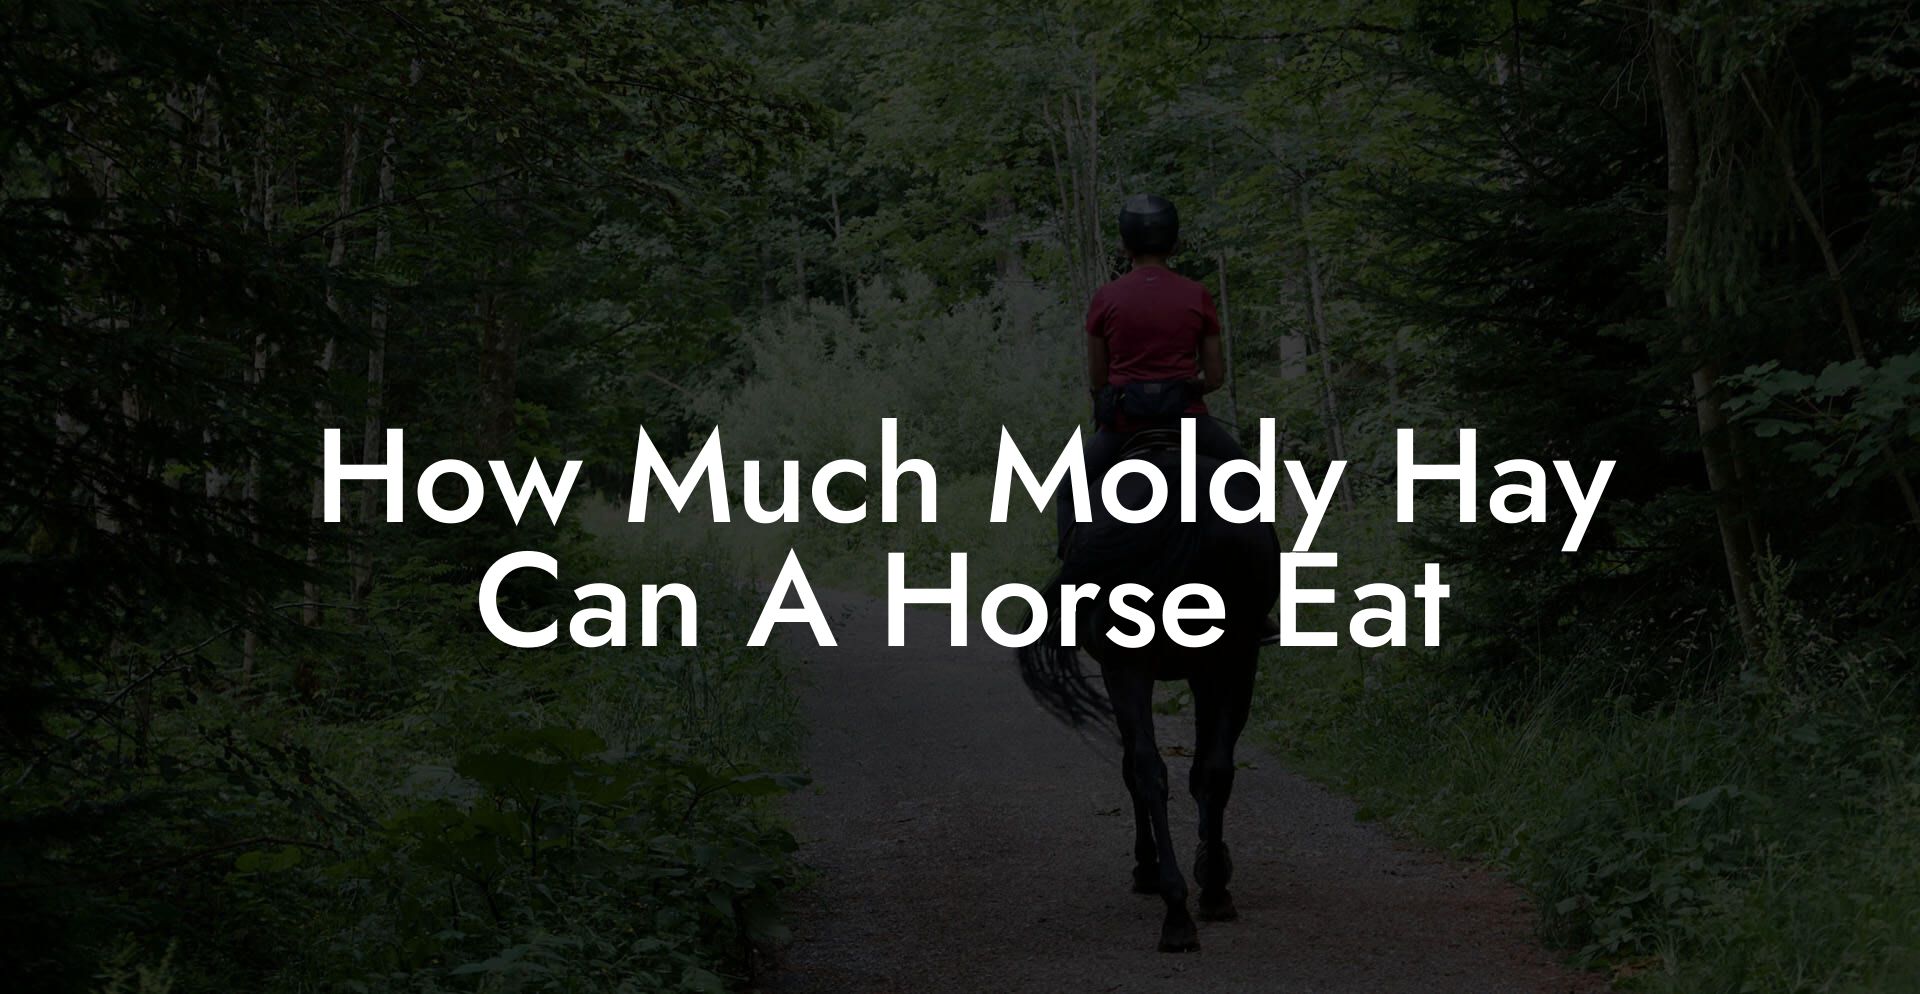 How Much Moldy Hay Can A Horse Eat